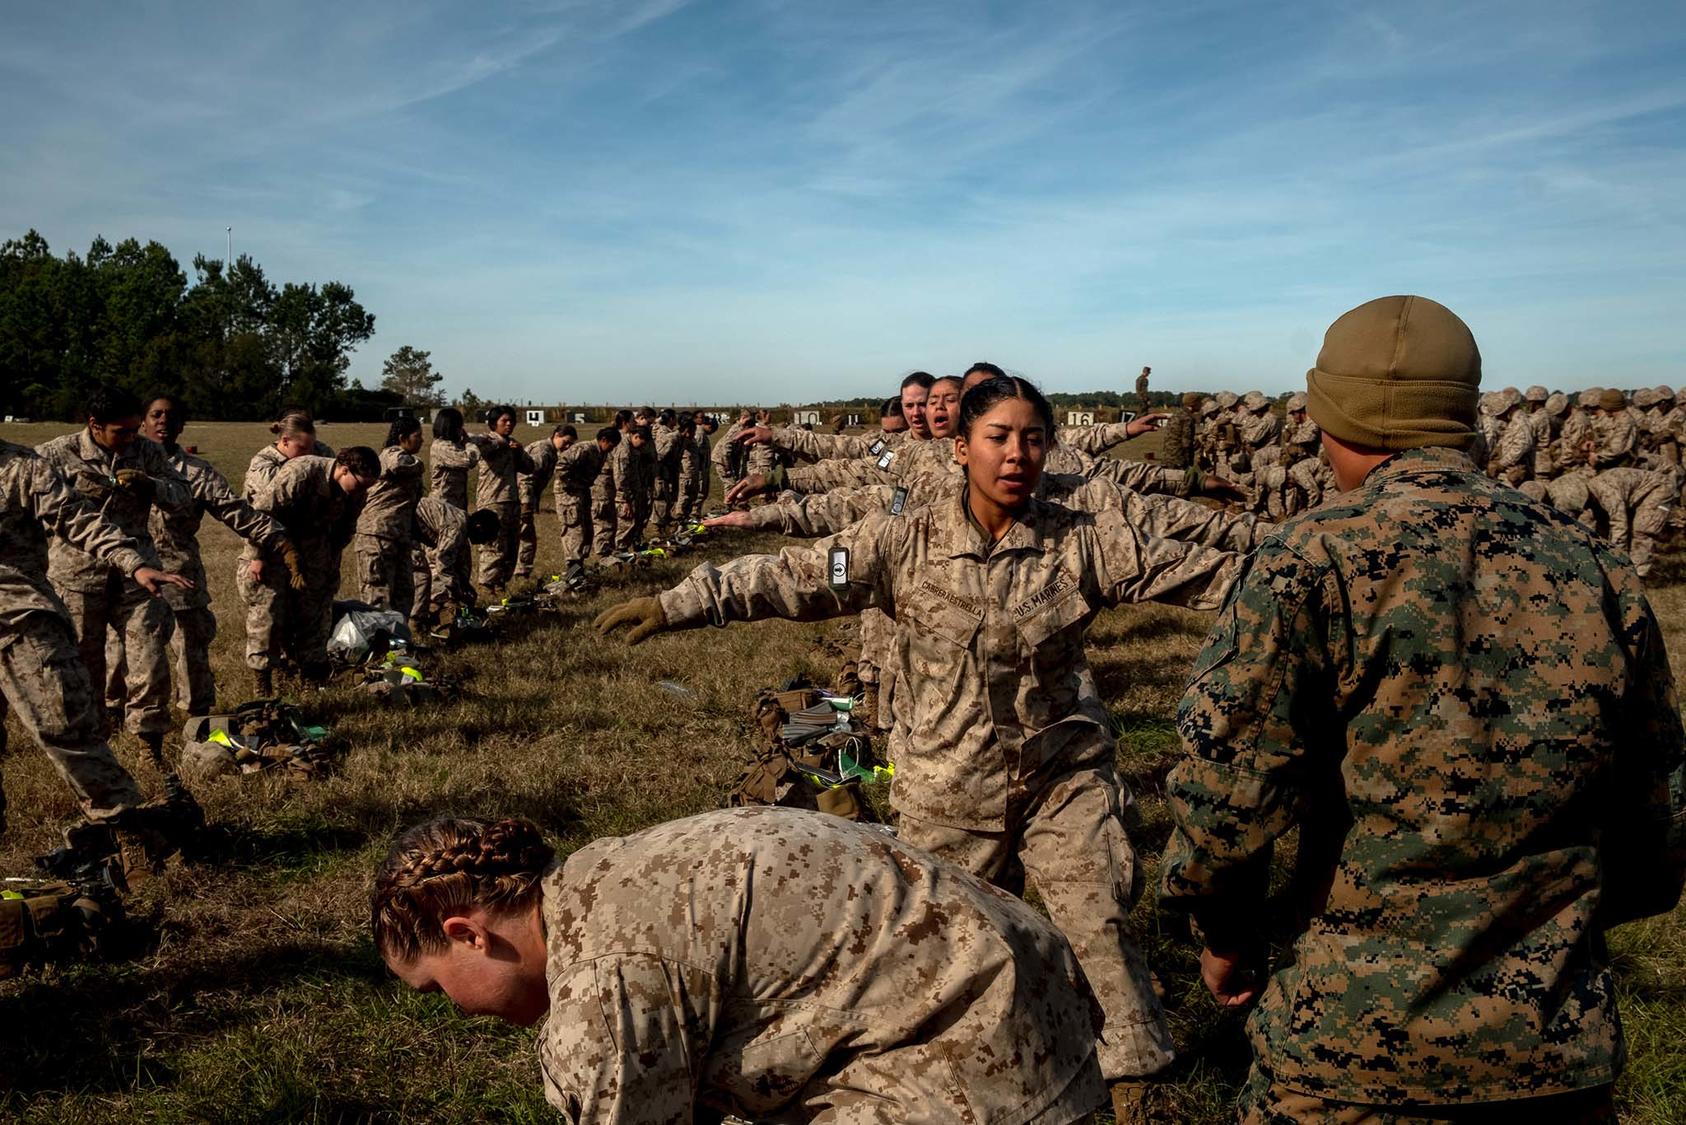 Marine recruits at Parris Island, S.C. while getting checked for weapons after a drill on Dec. 20, 2019. (Hilary Swift/The New York Times)